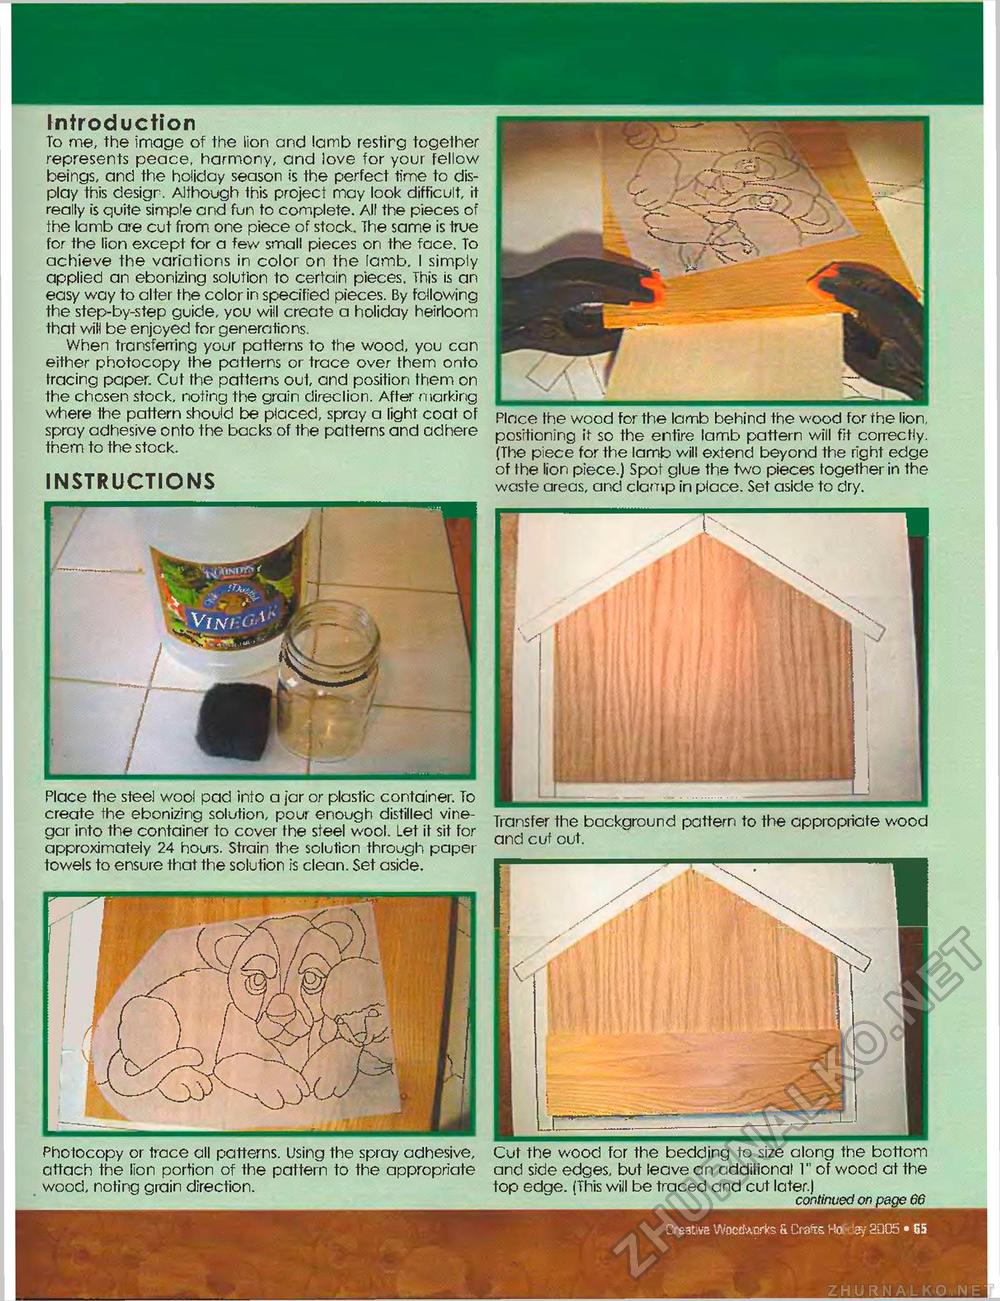 Creative Woodworks  & crafts-111-2005-Holiday,  65